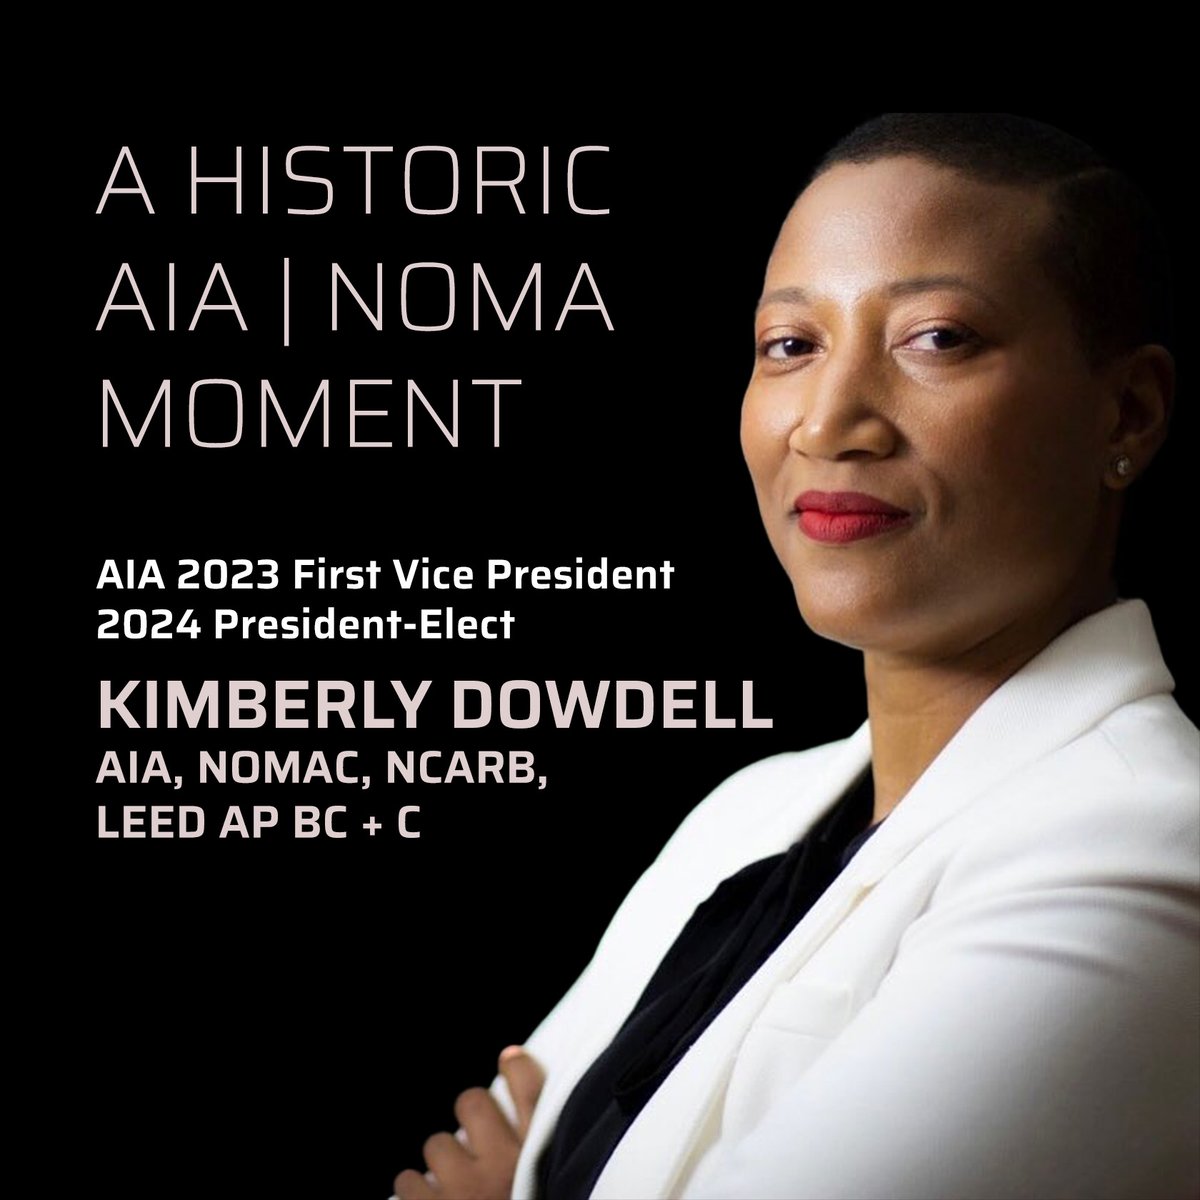 NOMA is pleased to congratulate the incoming AIA 2023 First Vice President/2024 President-Elect and NOMA member Kimberly Dowdell.

#AIA #elections #excellence #NOMA #KND4AIA